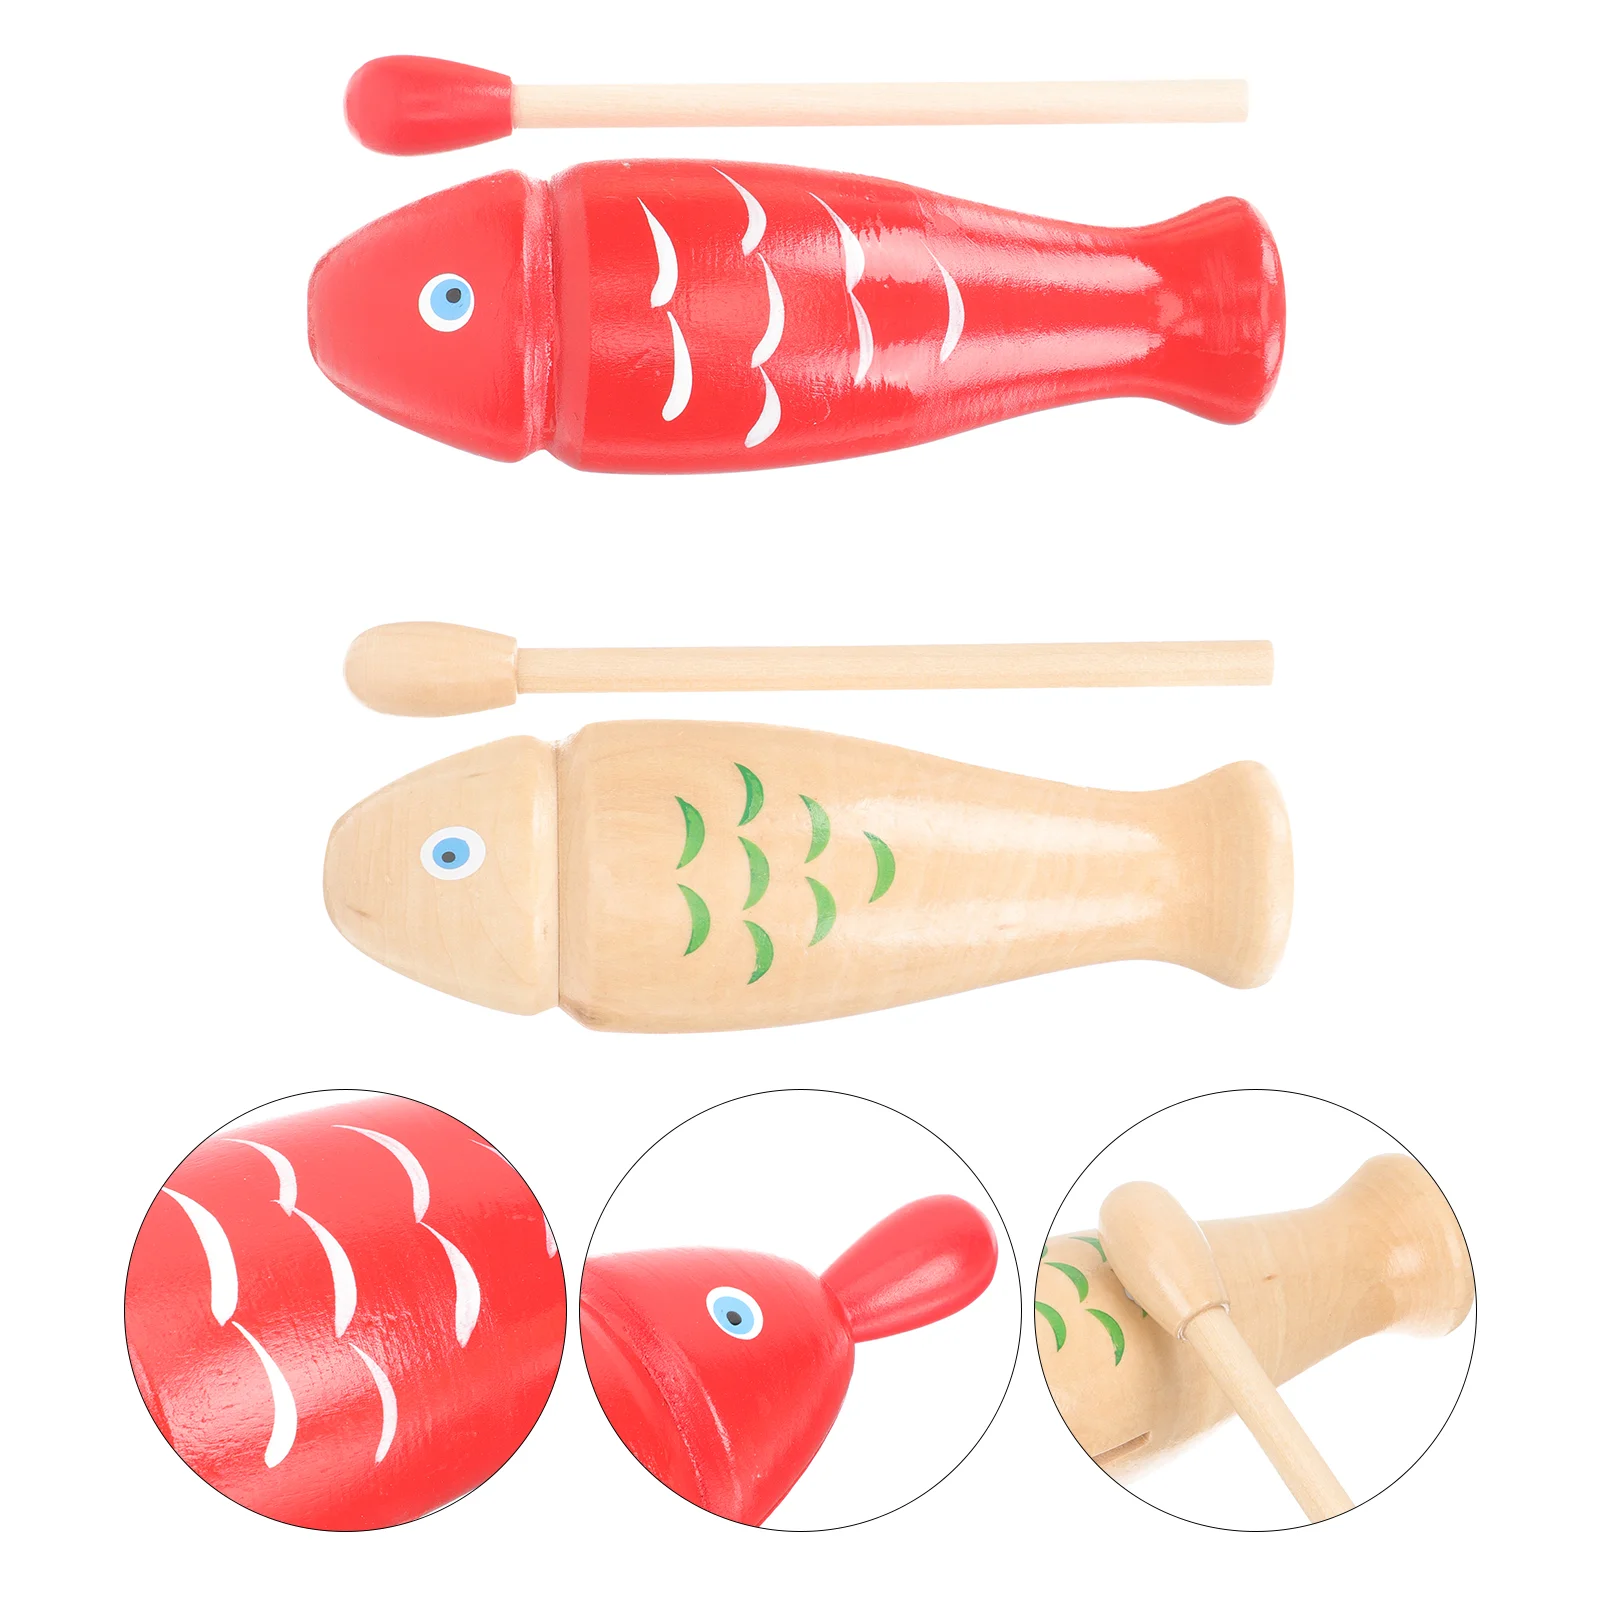 

2 Sets Wooden Playset Percussion Plaything Fish Music Toy Kids Enlightenment Modeling Playing Instrument Child Musical